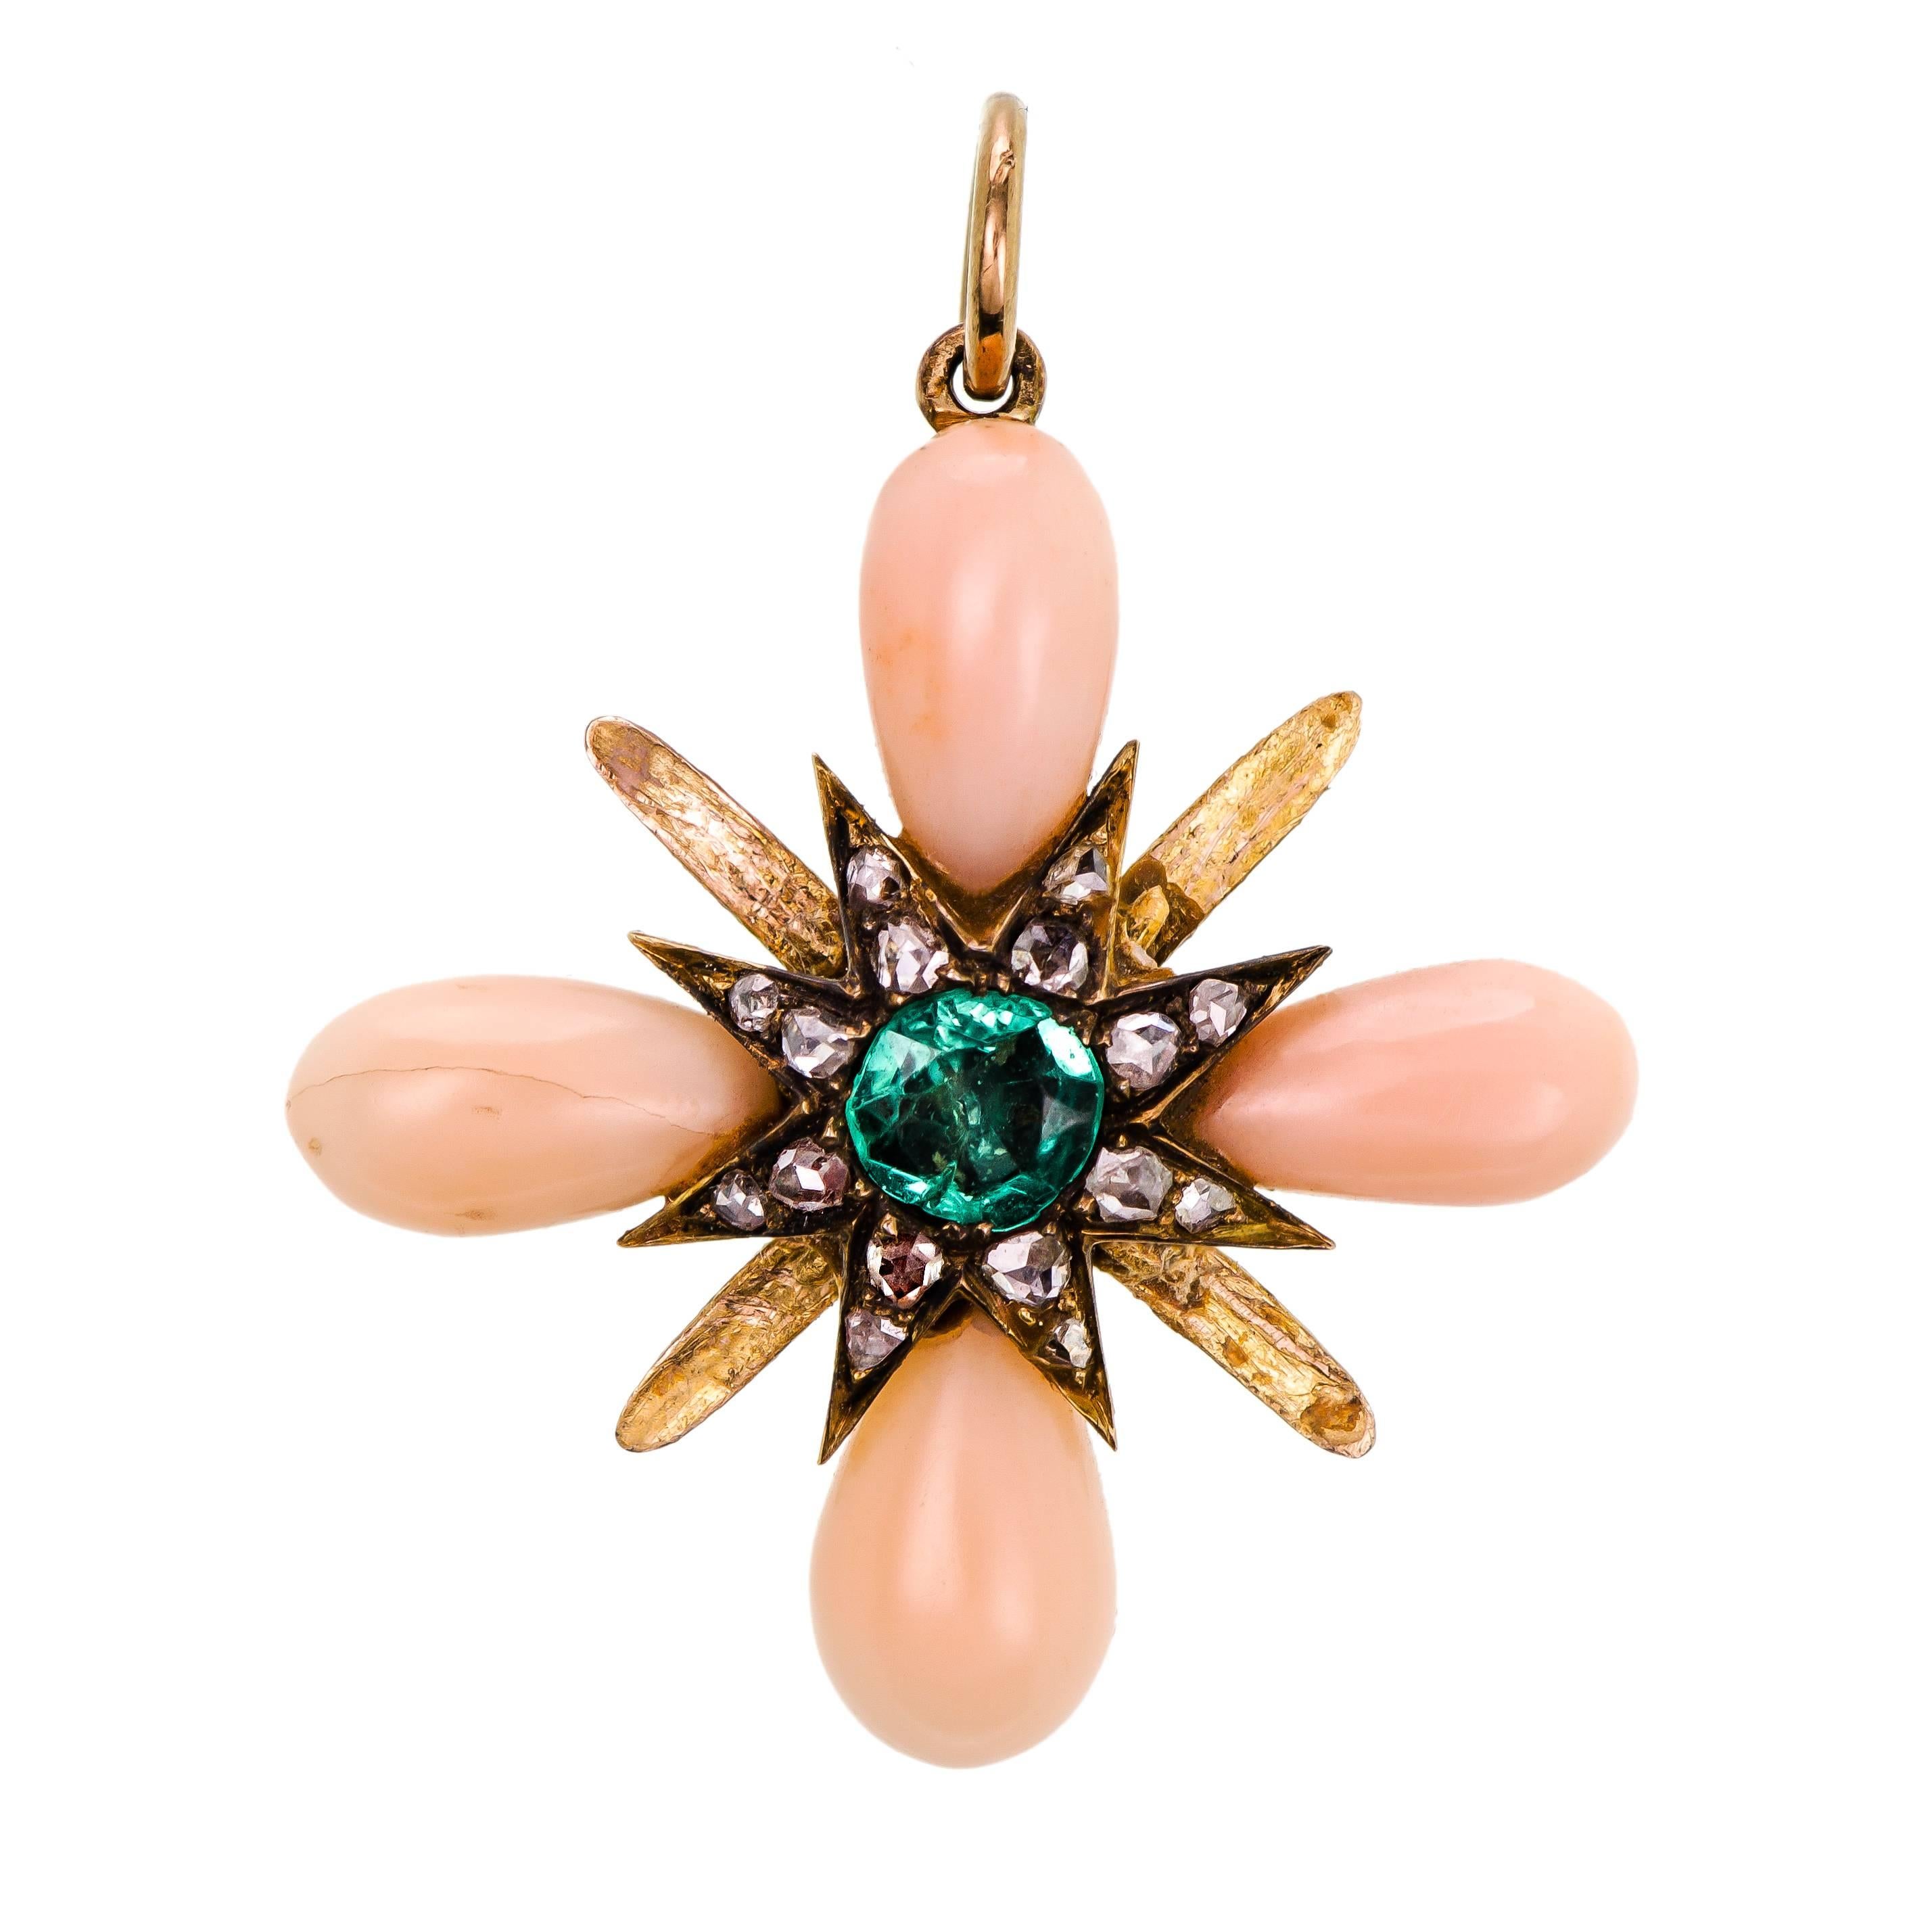 Lovely Antique Angelskin Coral Emerald and Diamond Pendant